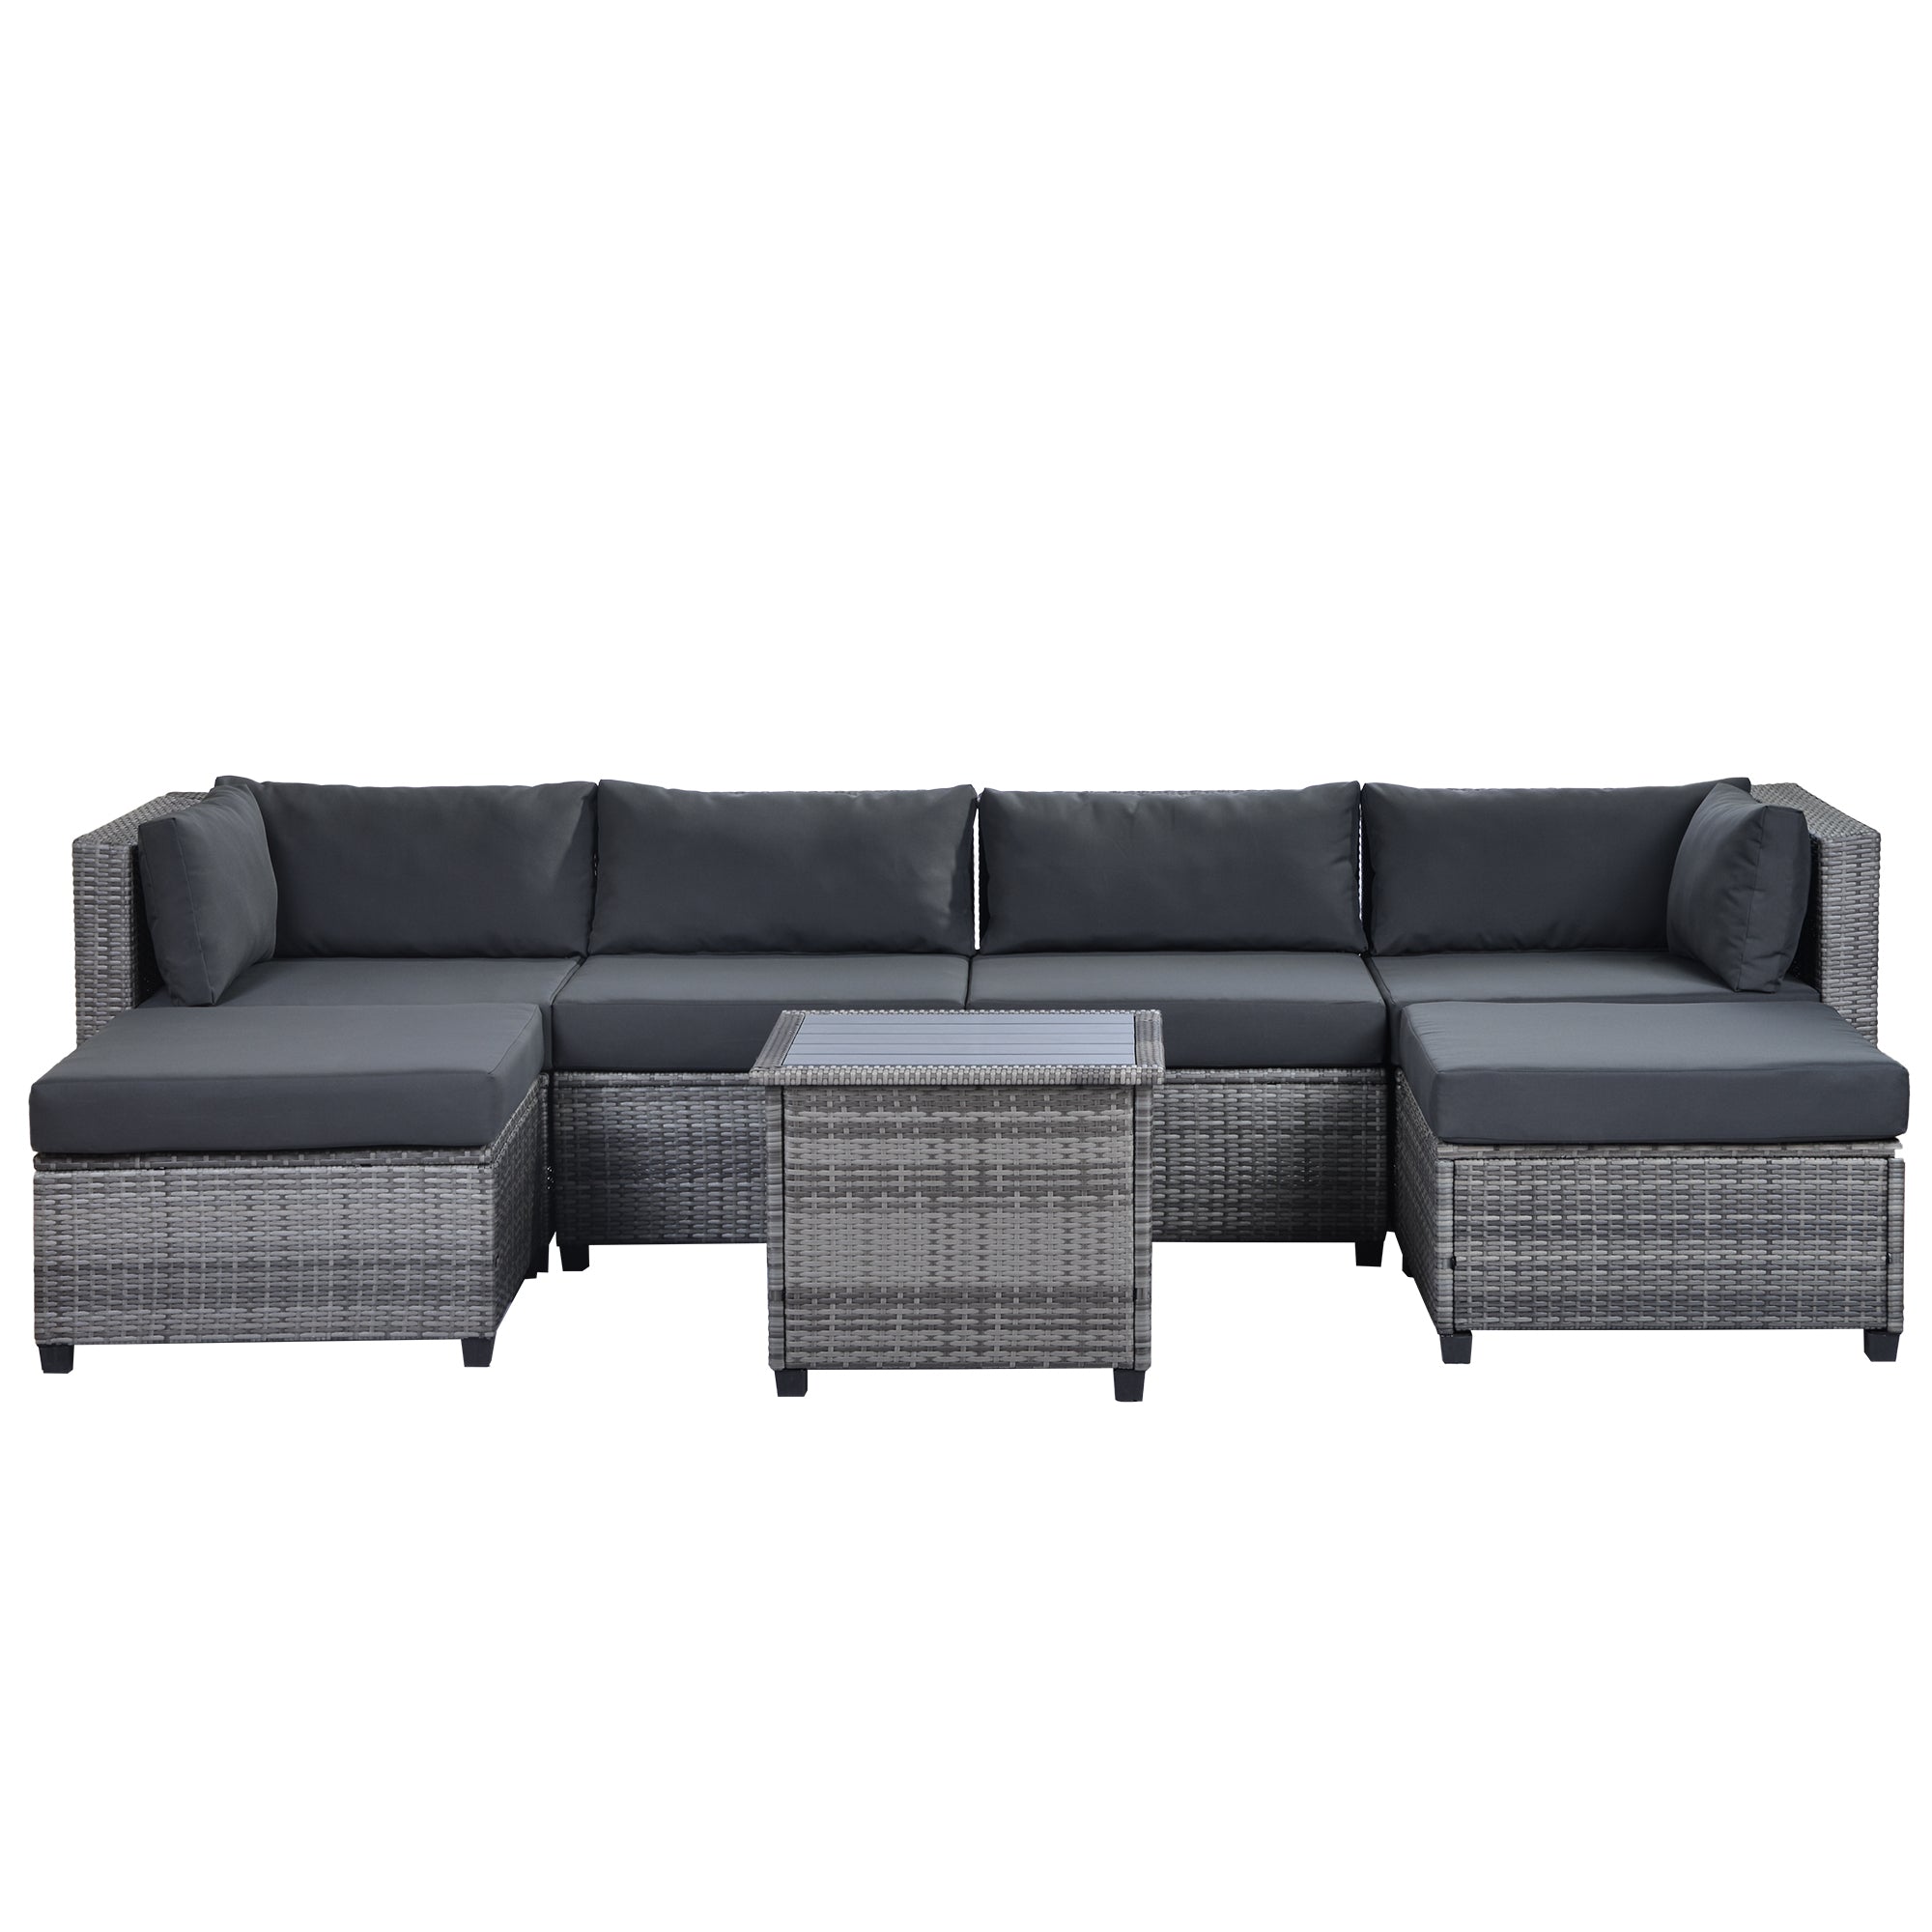 7 Piece Outdoor Rattan Sectional Sofa with Cushions